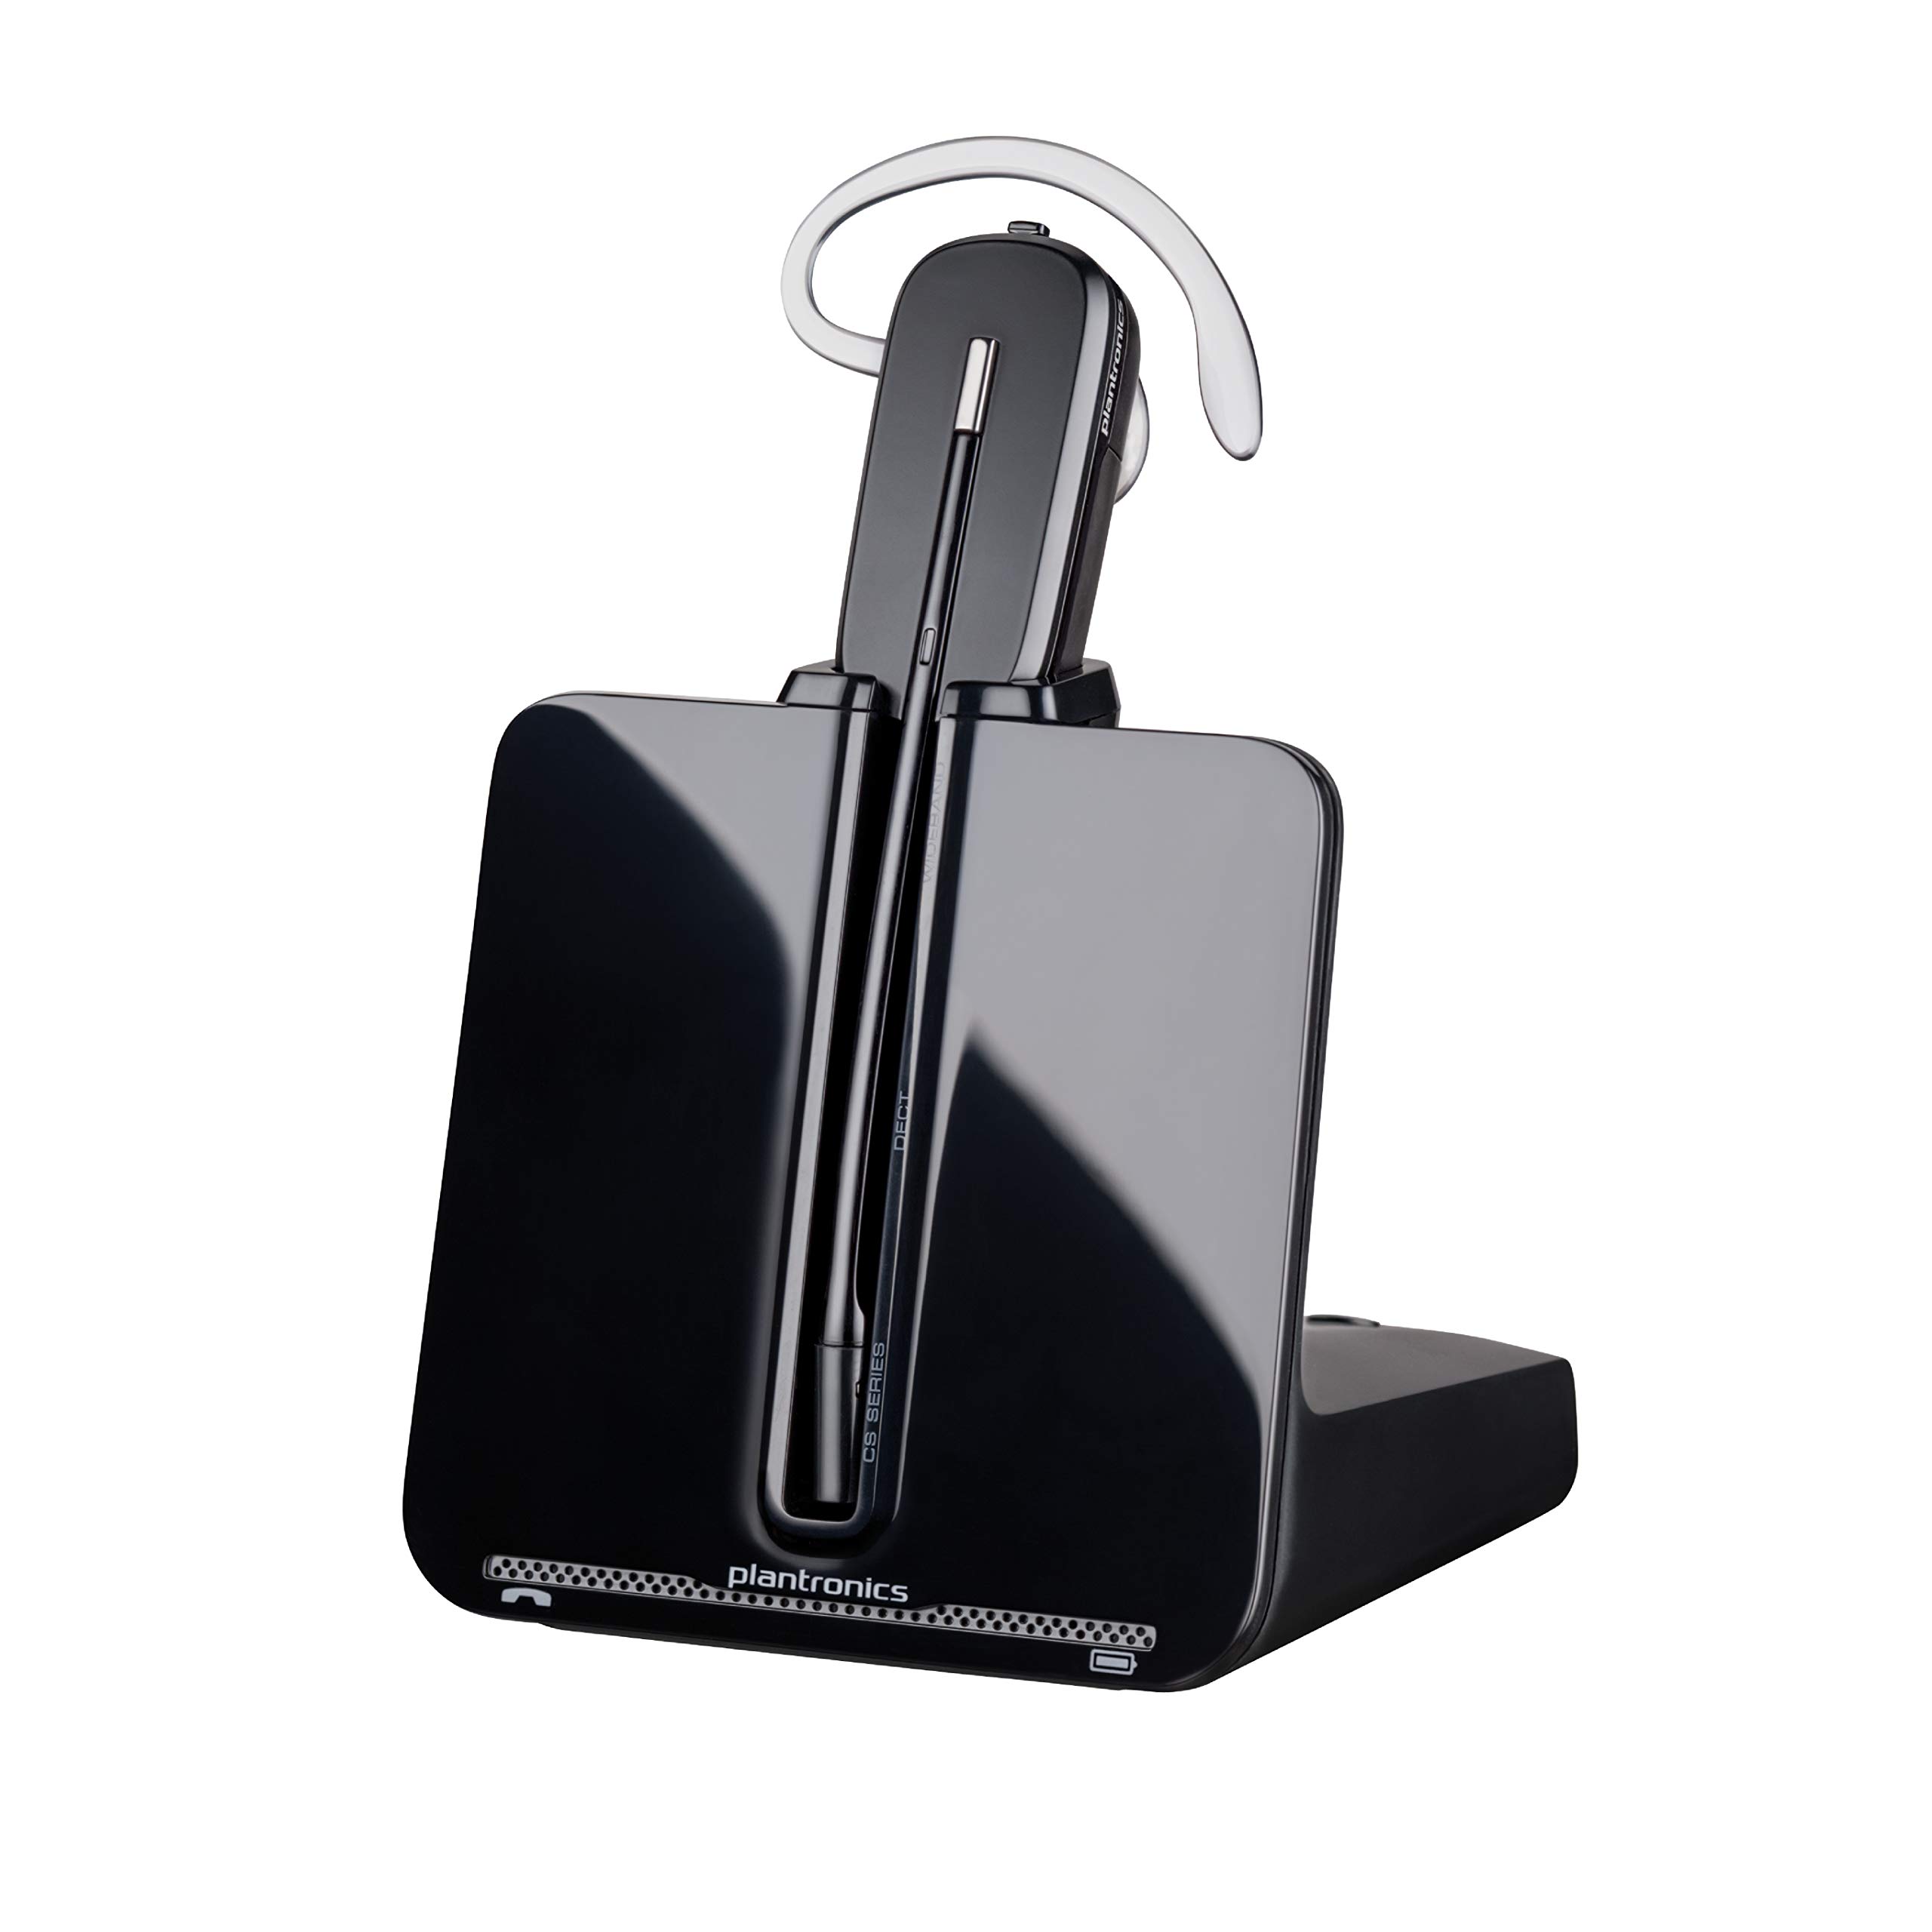 Plantronics - CS540 Wireless DECT Headset (Poly) - Single Ear (Mono) Convertible (3 wearing styles) - Connects to Desk Phone - Noise Canceling Microphone